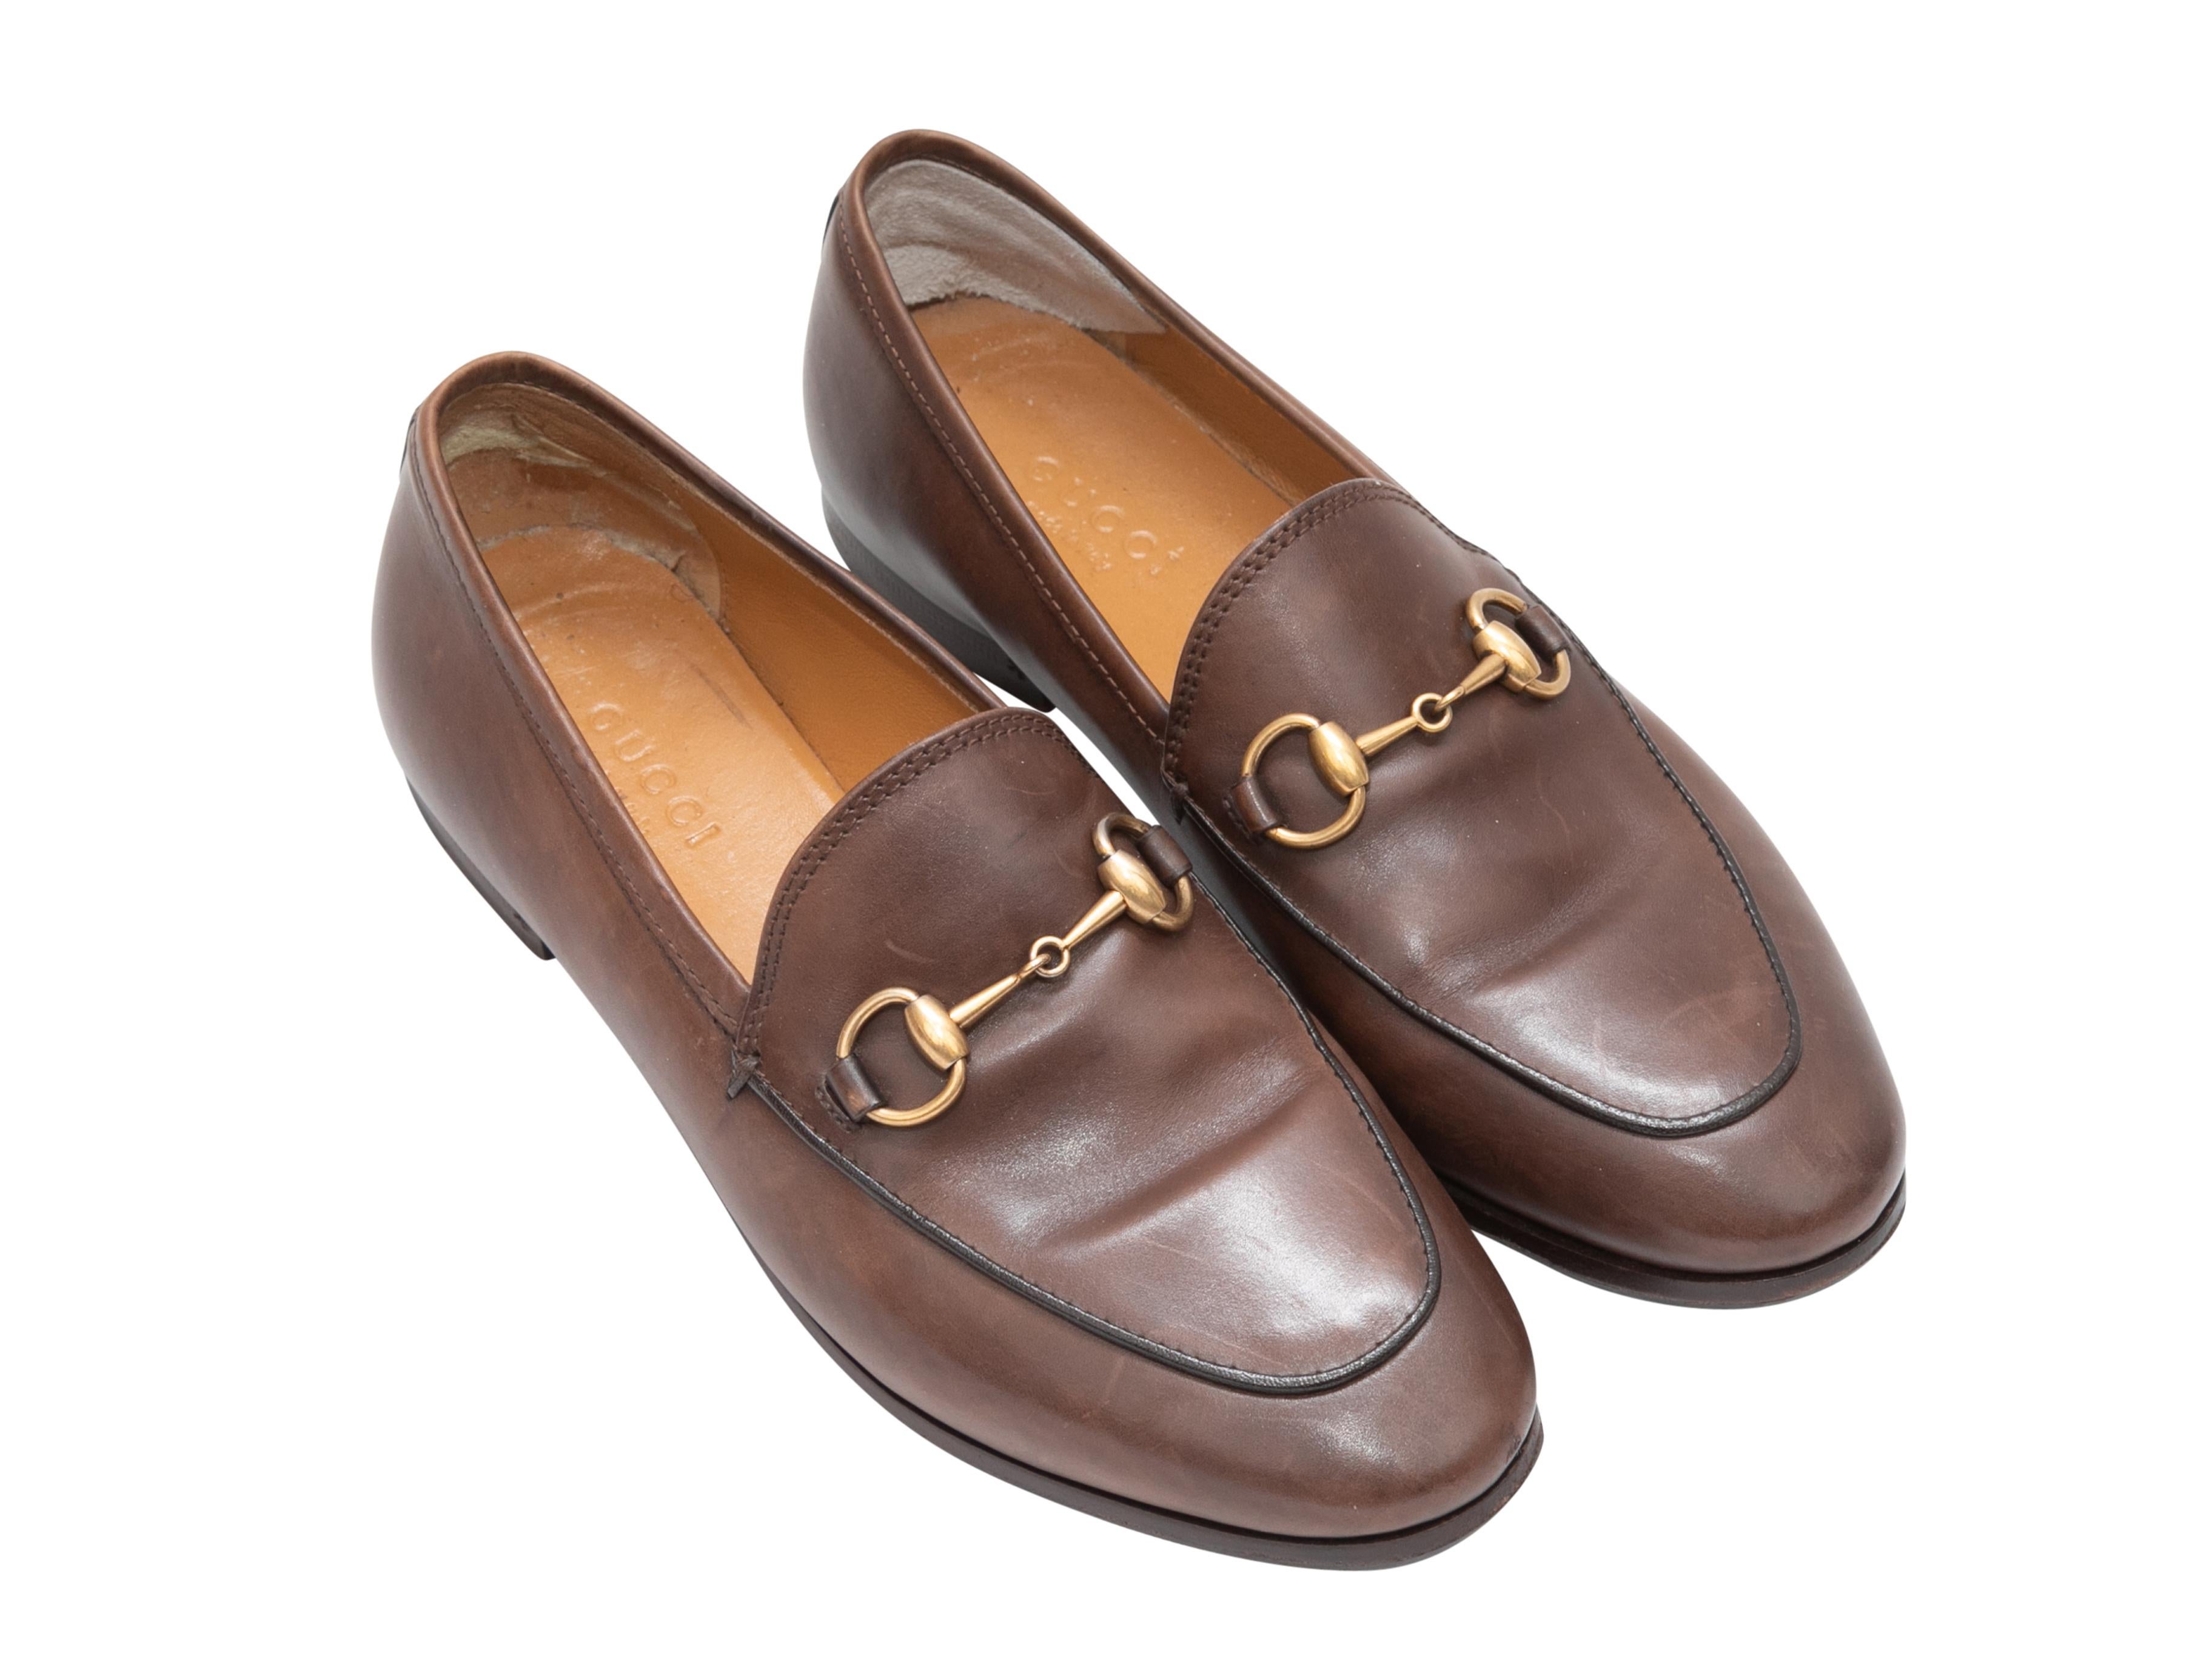 Brown leather Horsebit loafers by Gucci. Gold-tone hardware. 0.5